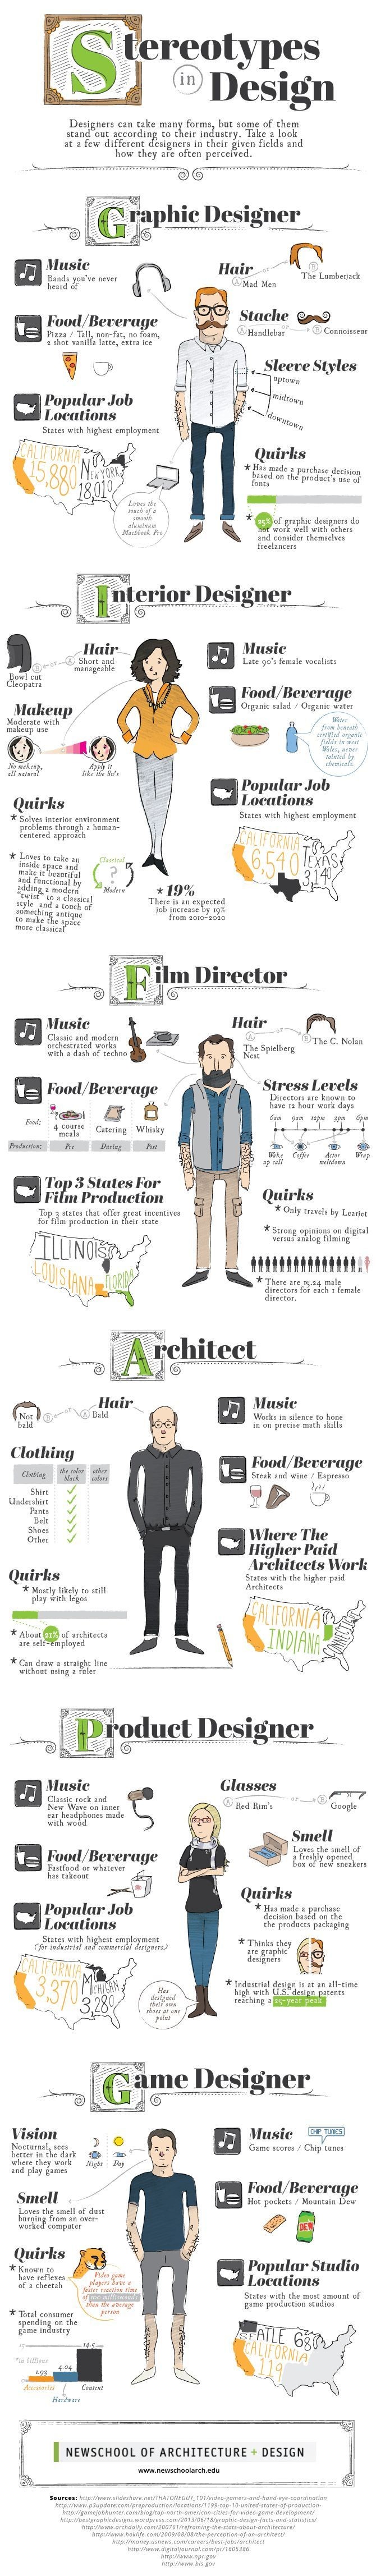 #Infographic : Stereotypes in Design | NewSchool o...